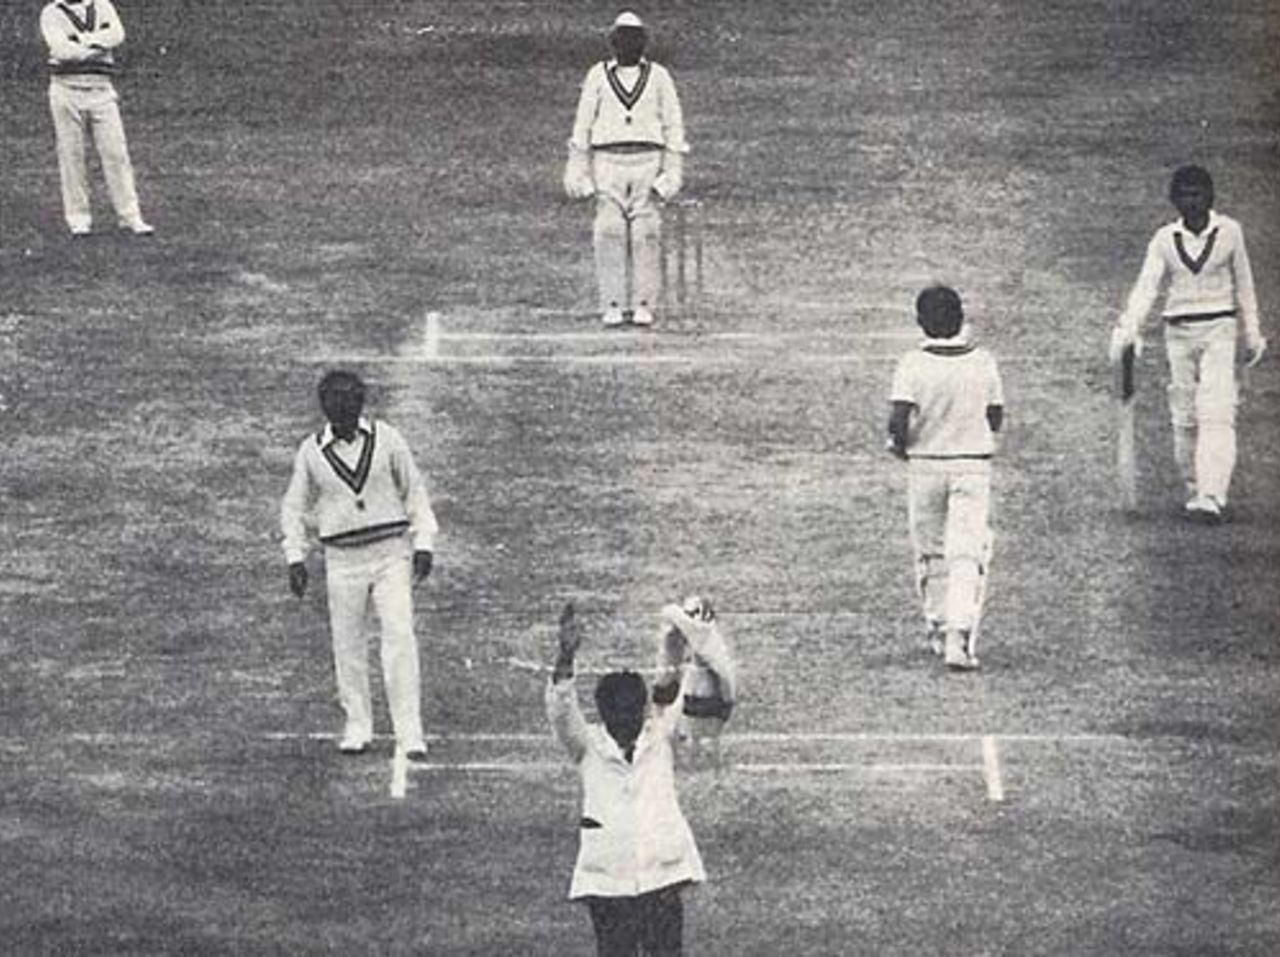 Zaheer Abbas hits Dilip Doshi for 6 on his way to a magnificent 168 off 176 balls at Faisalabad in 1982-83. This was his third consecutive hundred against India and, like this innings, the last two were mammoth and commanding scores as well. After tonking 215 in the first Test at Lahore - a game in which India responded gamely to Pakistan's imposing total - he led Pakistan to an innings-victory in the second with his 186 off only 246 balls after coming in to bat at 18 for 3. Here, at Faisalabad, he was one of four Pakistani batsmen to score hundreds in another victory. Pakistan won three out of six games and Zaheer continued dominating India: he had 650 runs in the series at an average of 130. This series reflected the hold he had over India throughout his career. Only in one of his four series against India did he not perform well. Even then, he ended with 1740 in 19 games against India with six hundreds and an average of 87. In comparison, against all other opposition, he averaged 35.72.